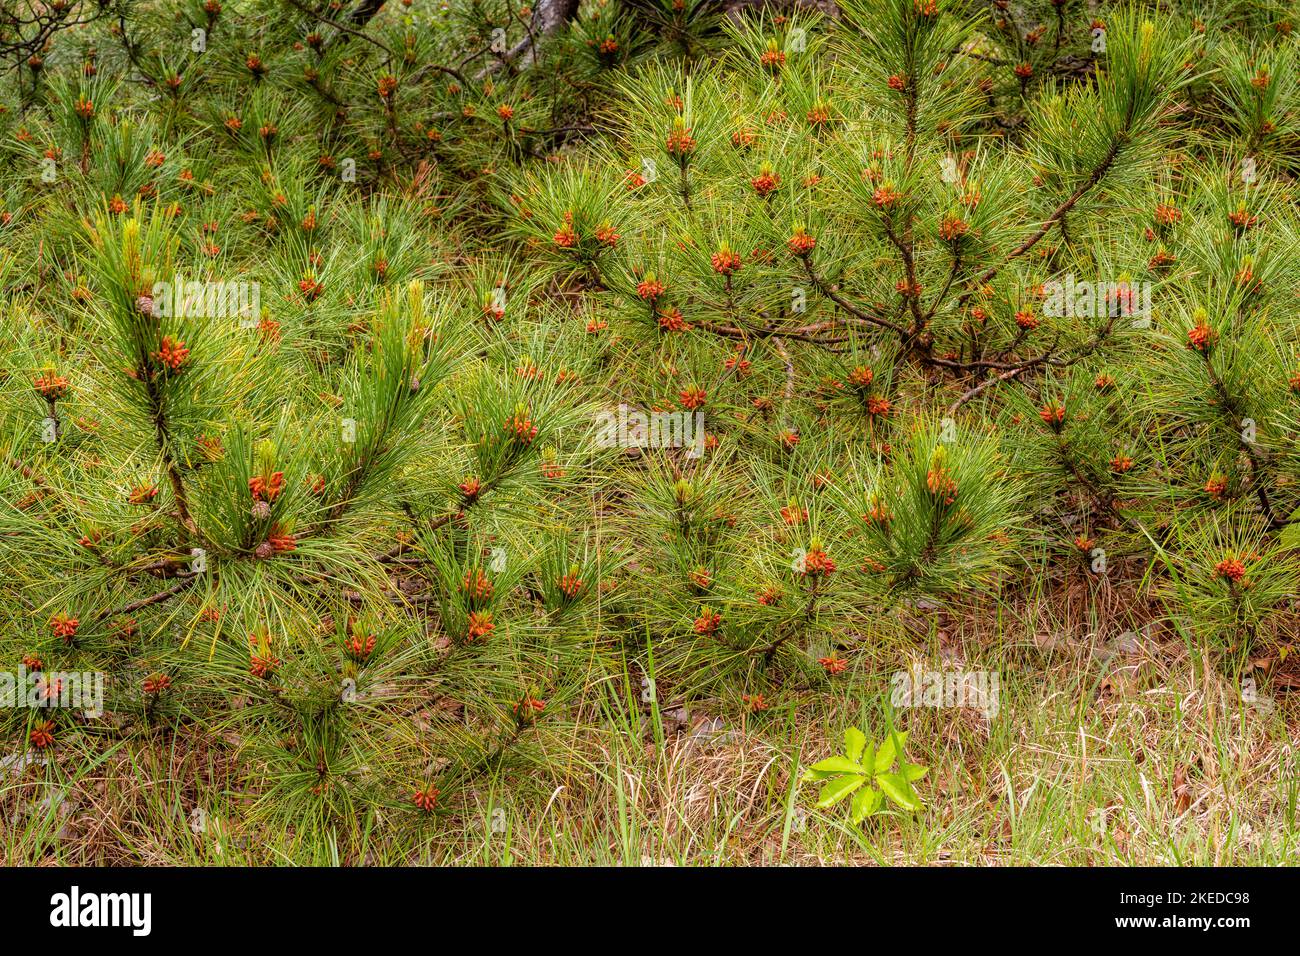 Red pine(Pinus resinosa). Cones and needles, Pinery Provincial Park, Grand Bend, Ontario, Canada Stock Photo